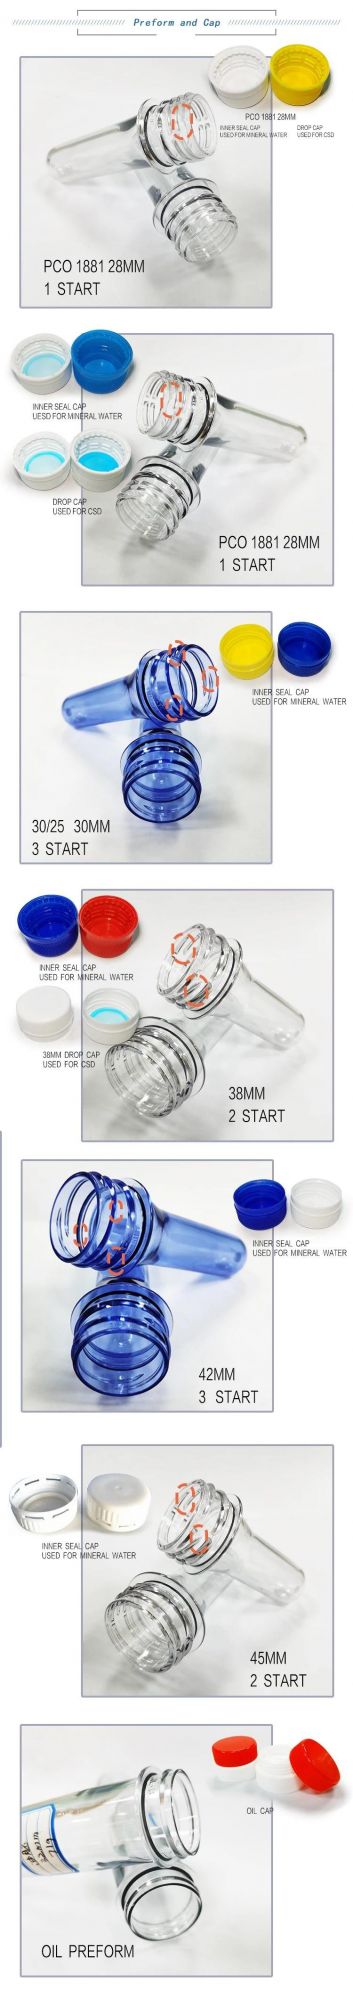 45mm 46mm 48mm Plastic Pet Preform for Bottle with Cap and Handle